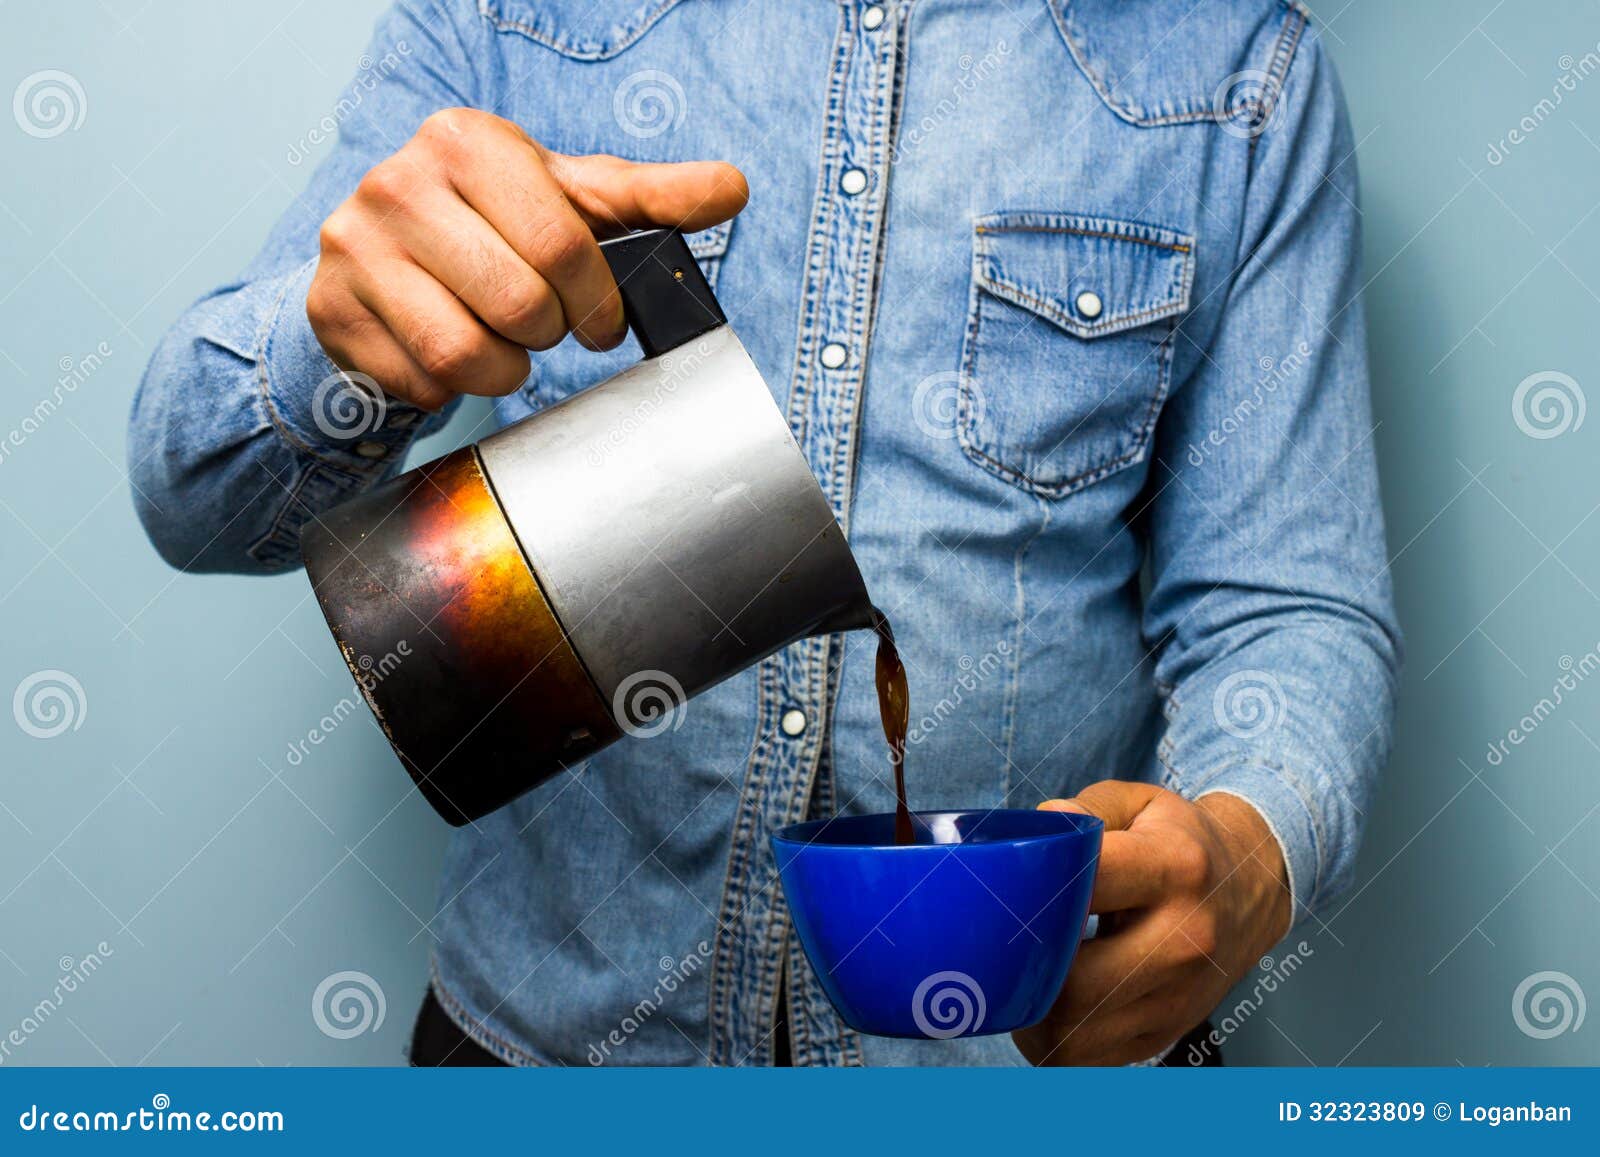 worker pouring coffee from moka pot